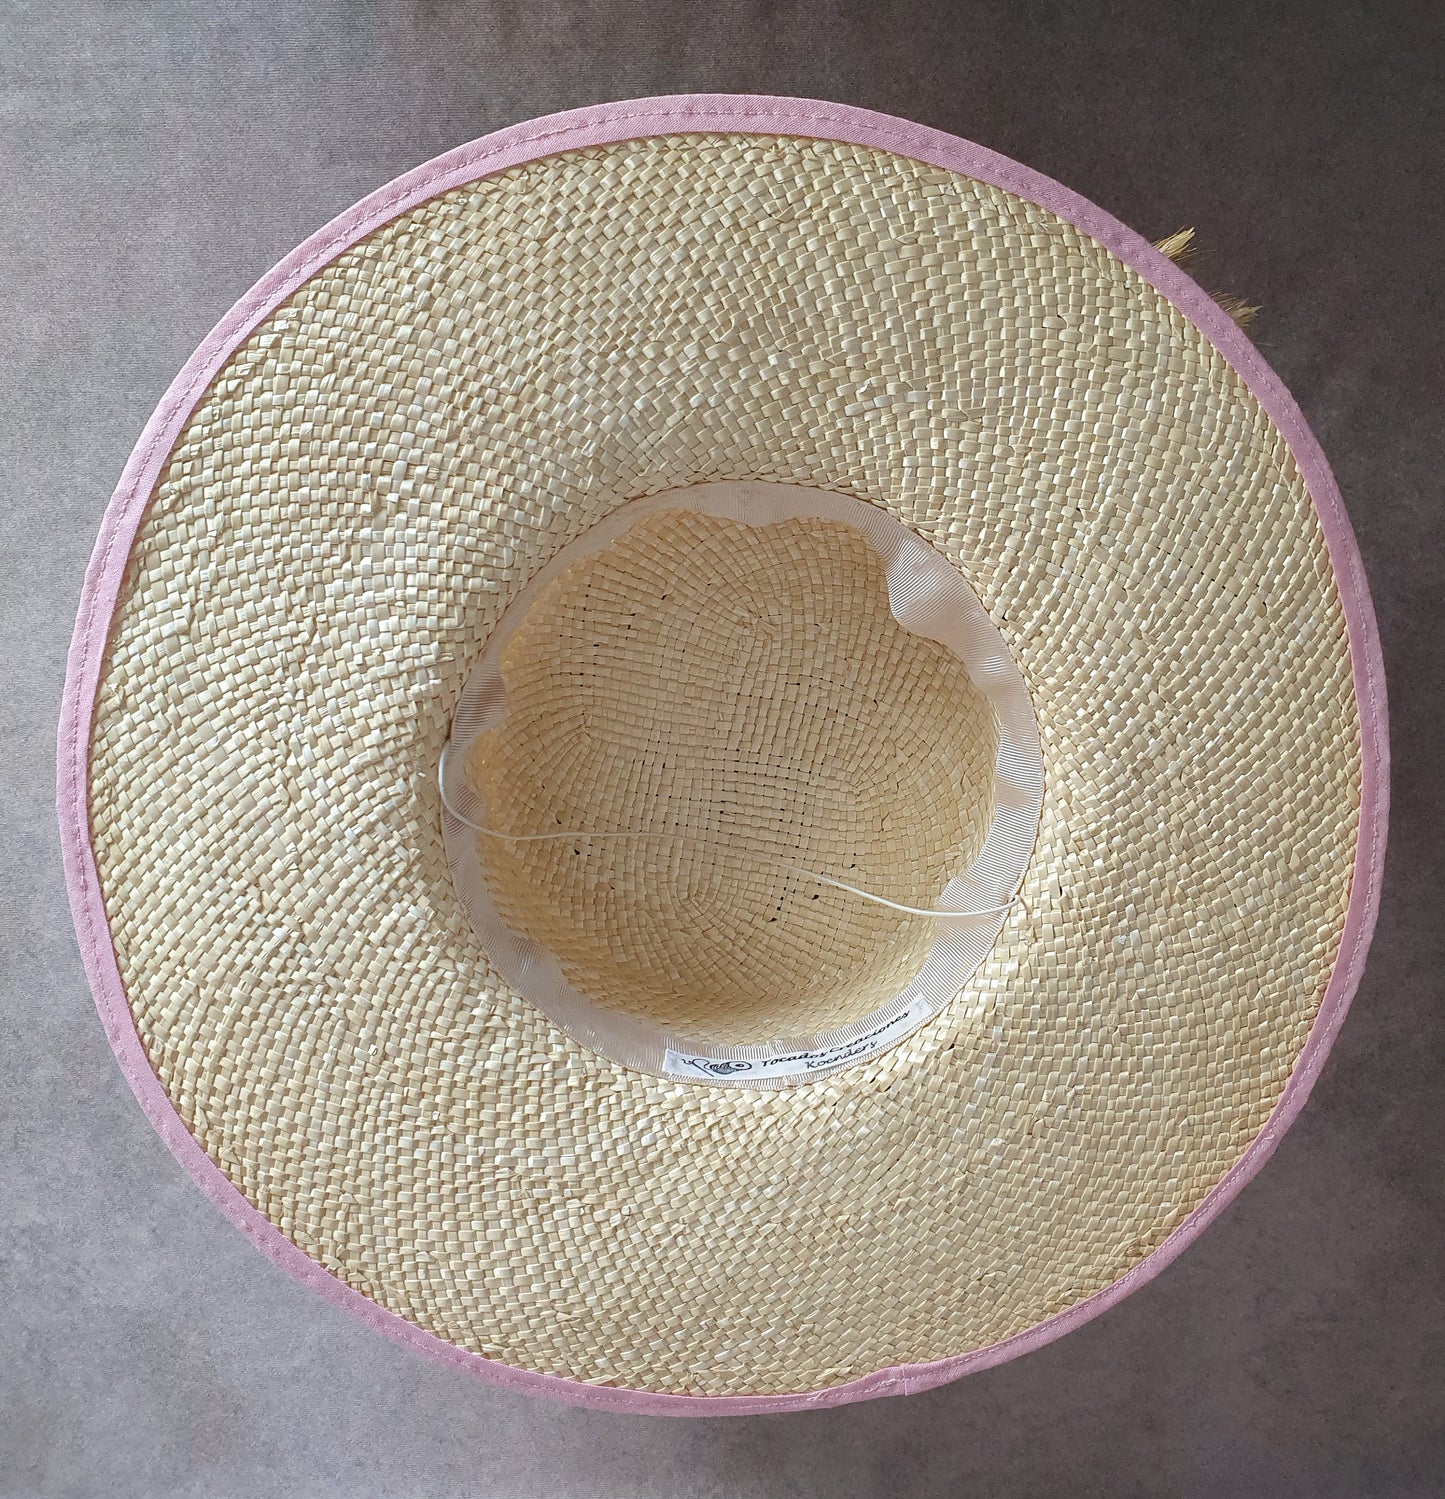 Elegant handmade women's hat with abaca silk and dried flowers, guest hat, straw hat, summer hat, wedding hat, special occasions